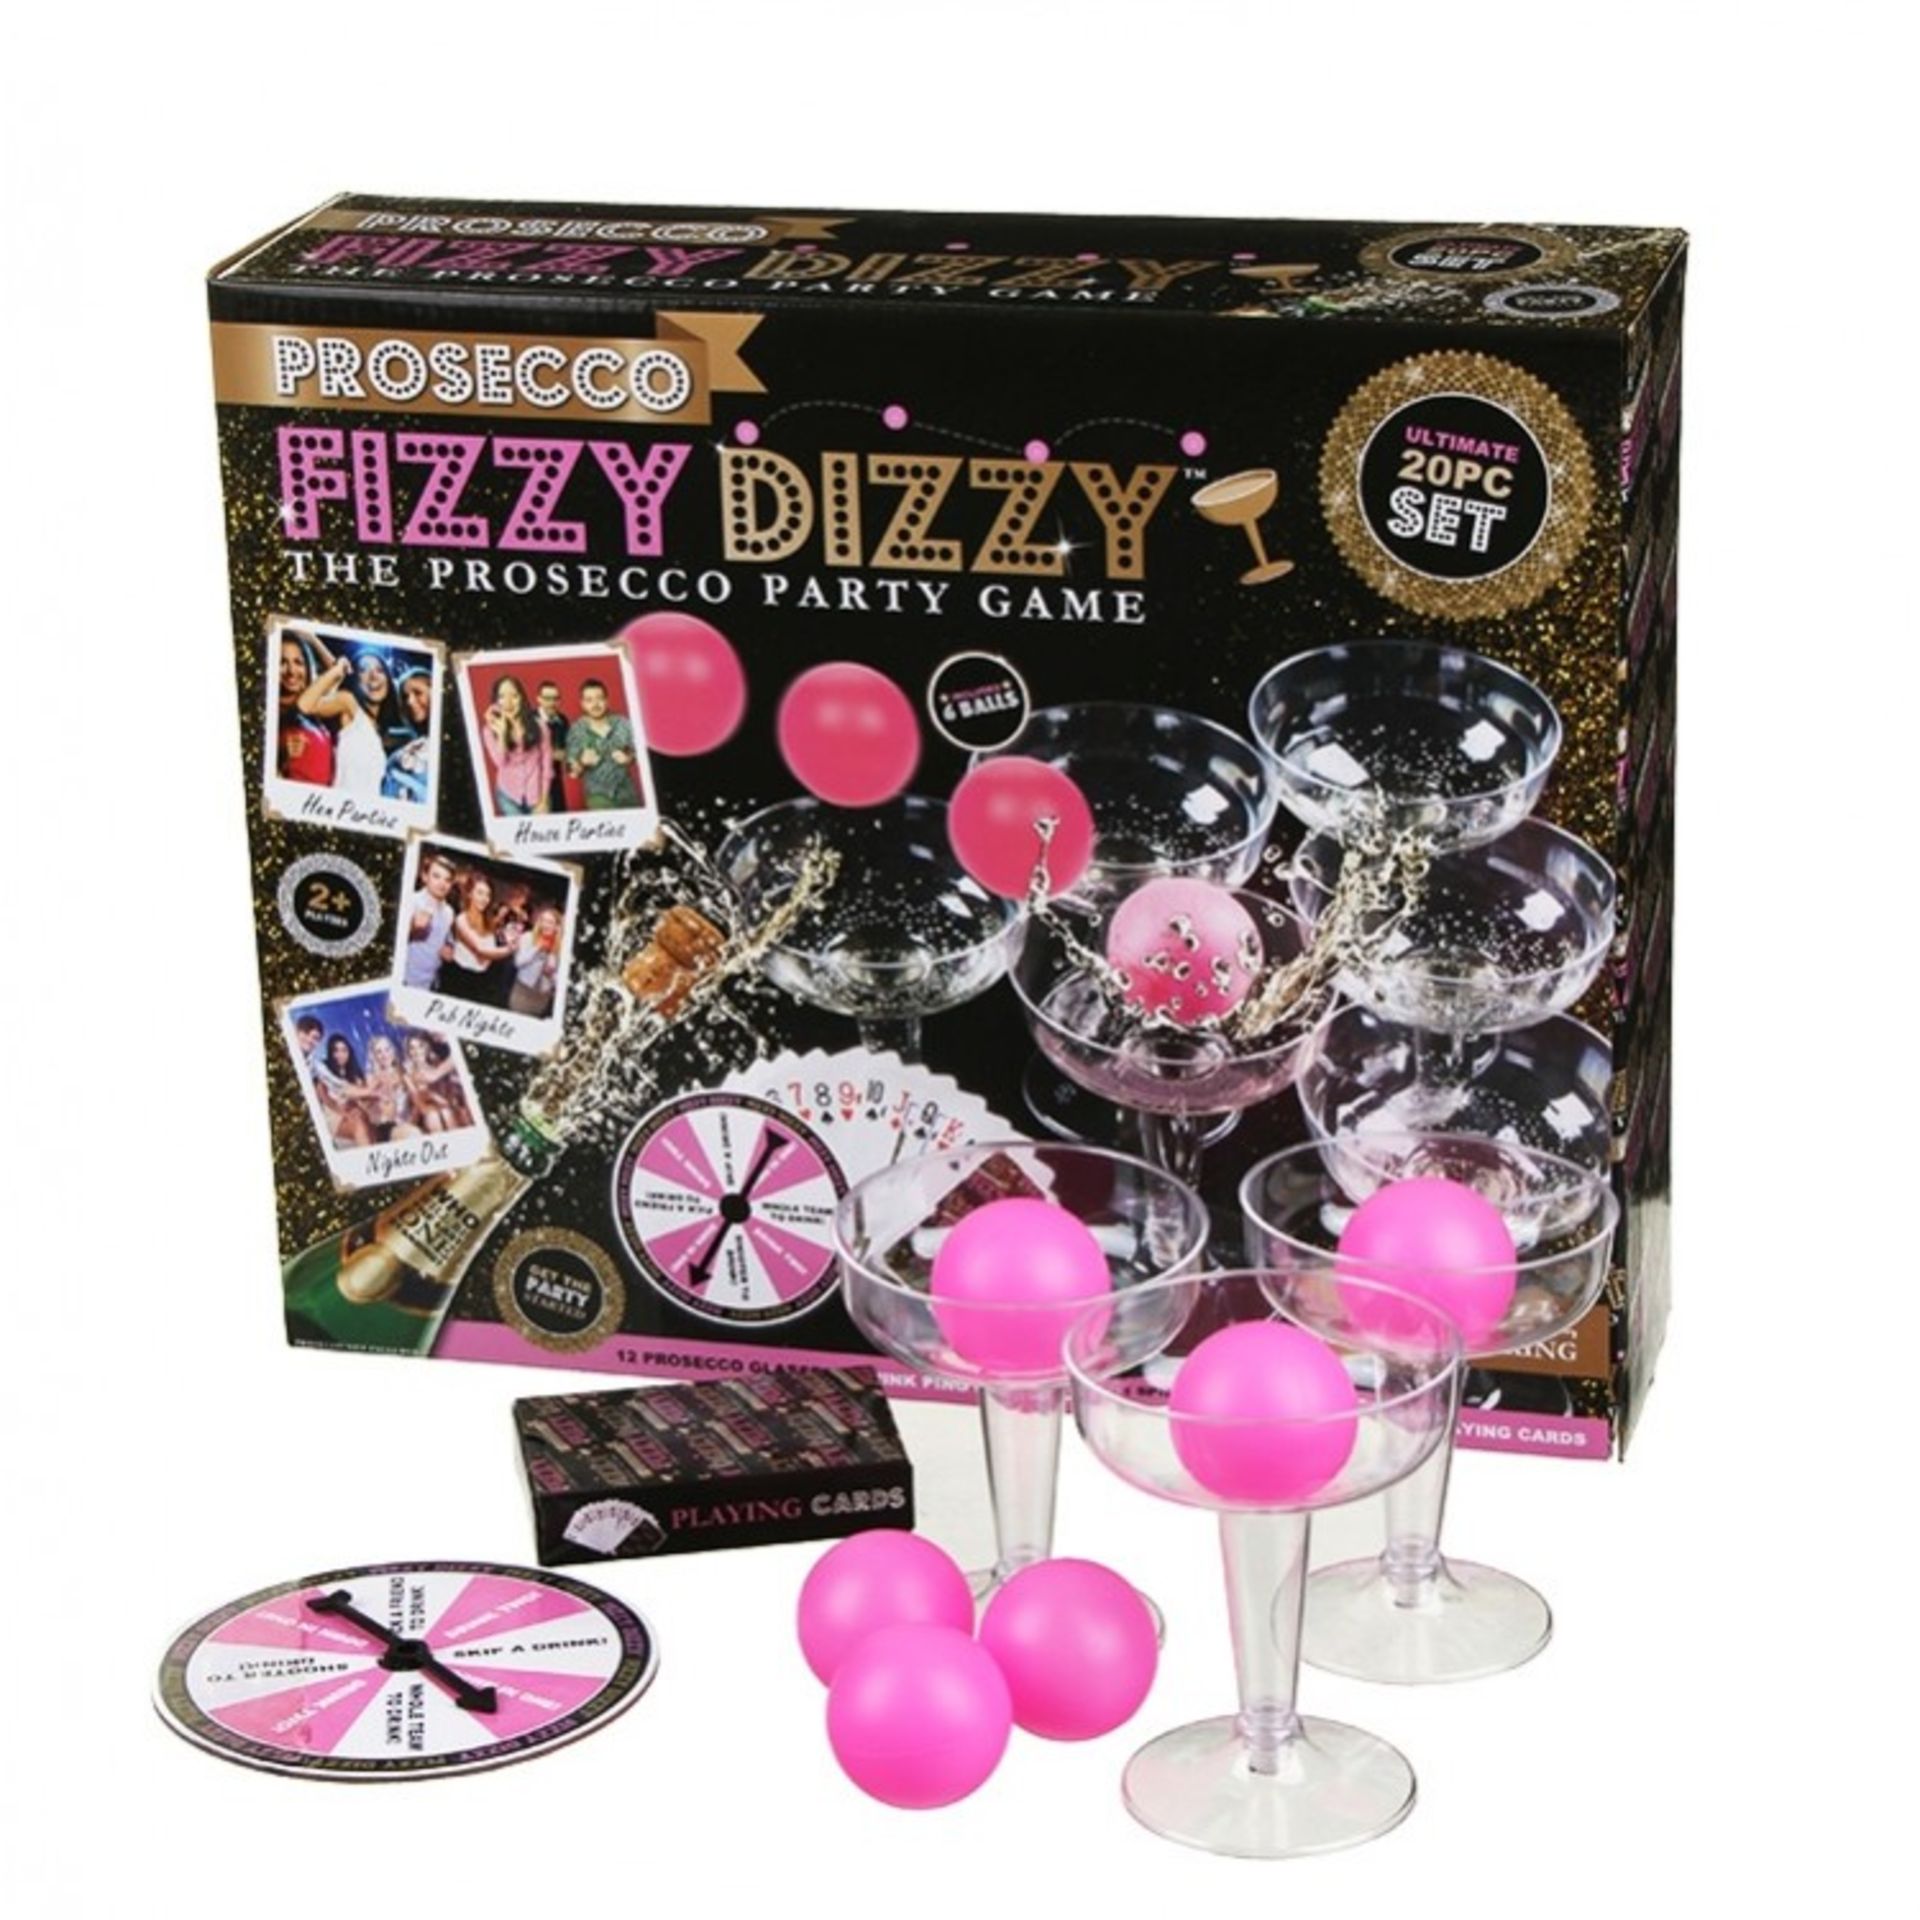 V Brand New Ultimate 20pce Fizzy Dizzy Prosecco Party Game-Includes Prosecco Glasses-Pink Ping